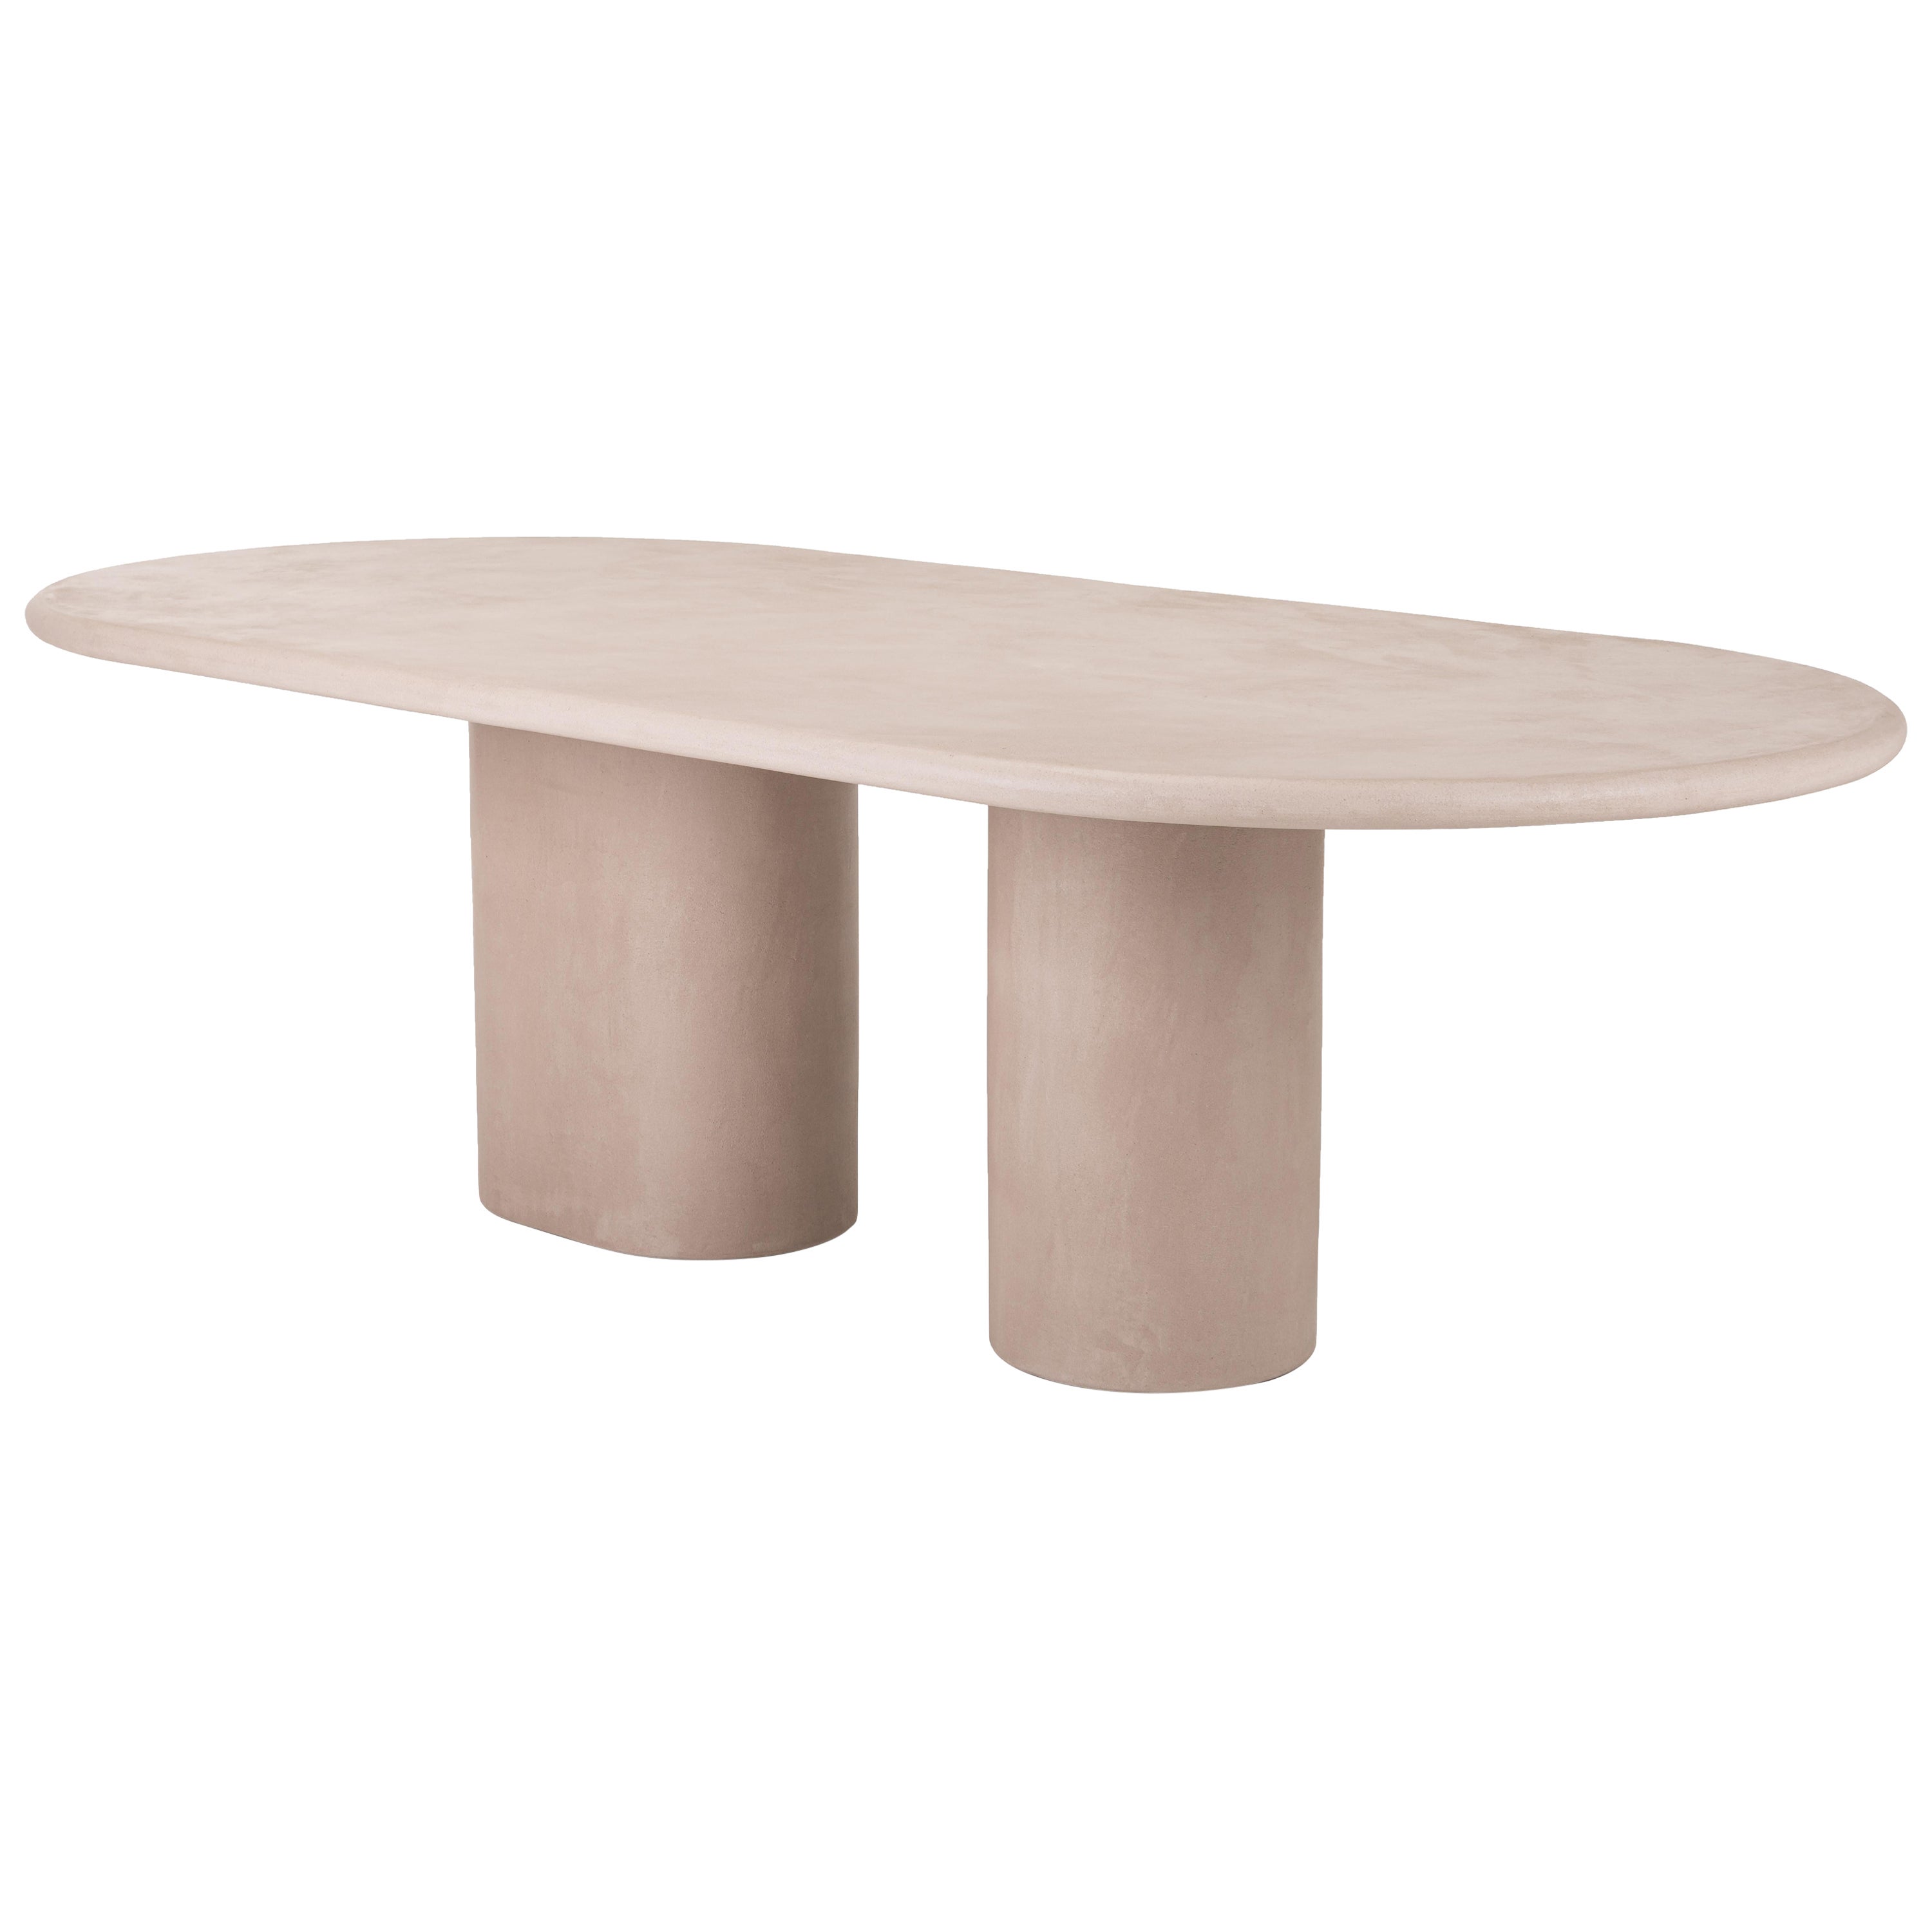 Contemporary Rounded Natural Plaster "Column" Table 300 cm by Isabelle Beaumont